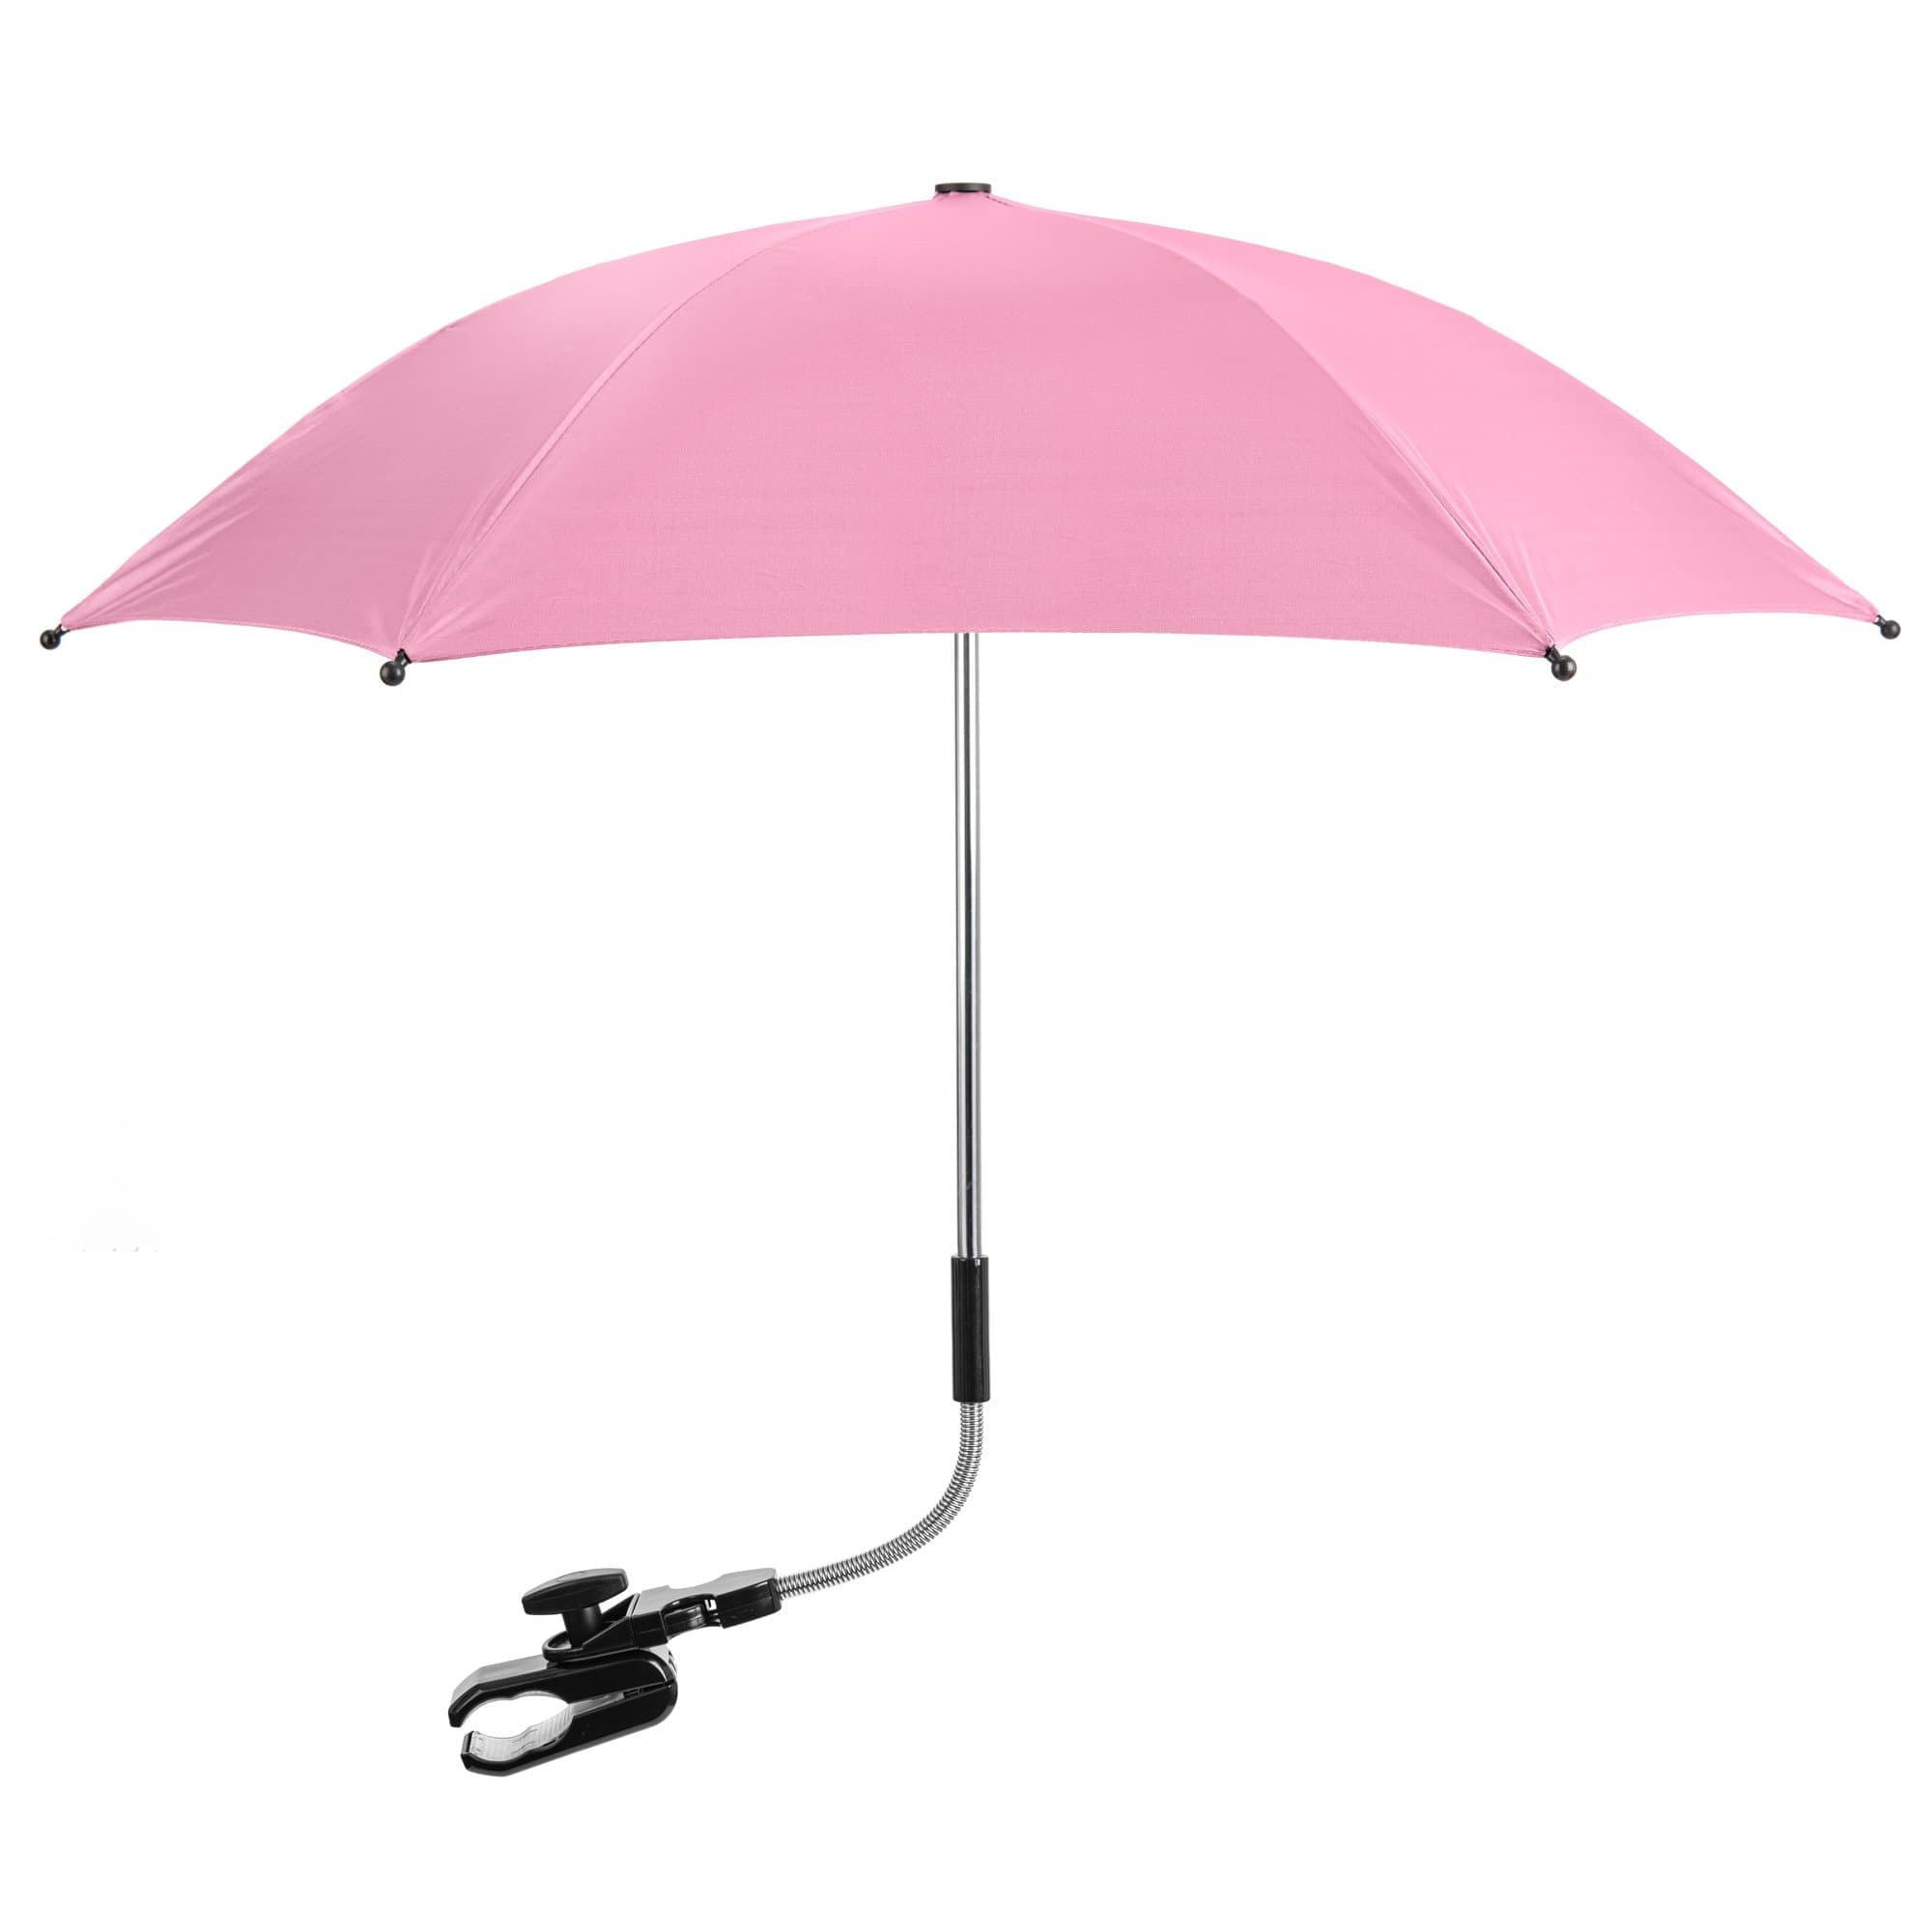 Baby Parasol Compatible With Kiddicare - Fits All Models - Light Pink / Fits All Models | For Your Little One